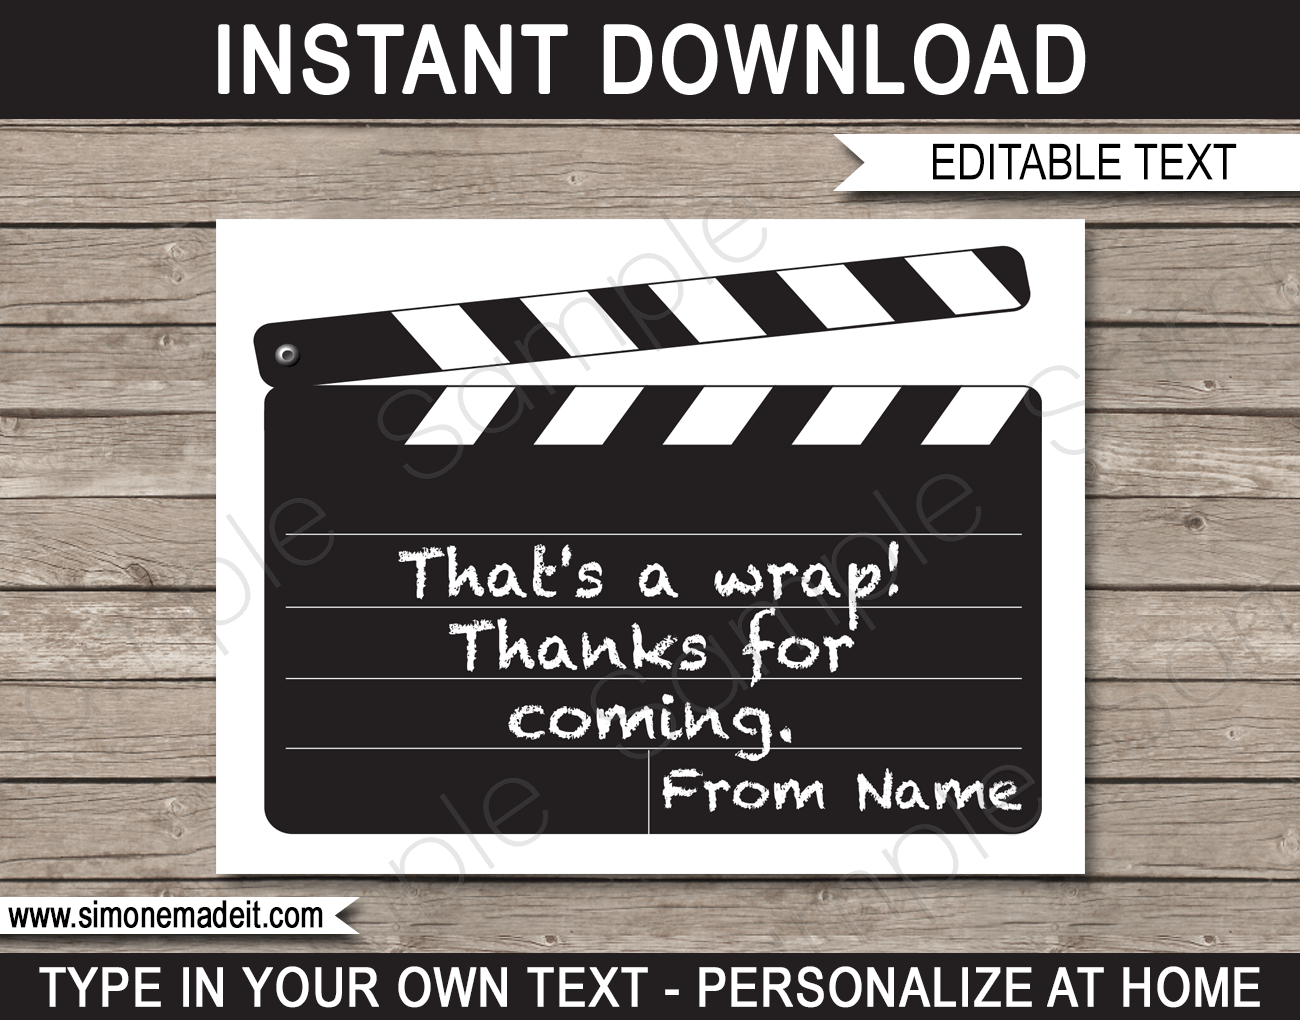 Movie Party Favor Tags | Thank You Tags | Birthday Party | Movie Night | Editable DIY Template | $3.00 INSTANT DOWNLOAD via SIMONEmadeit.com